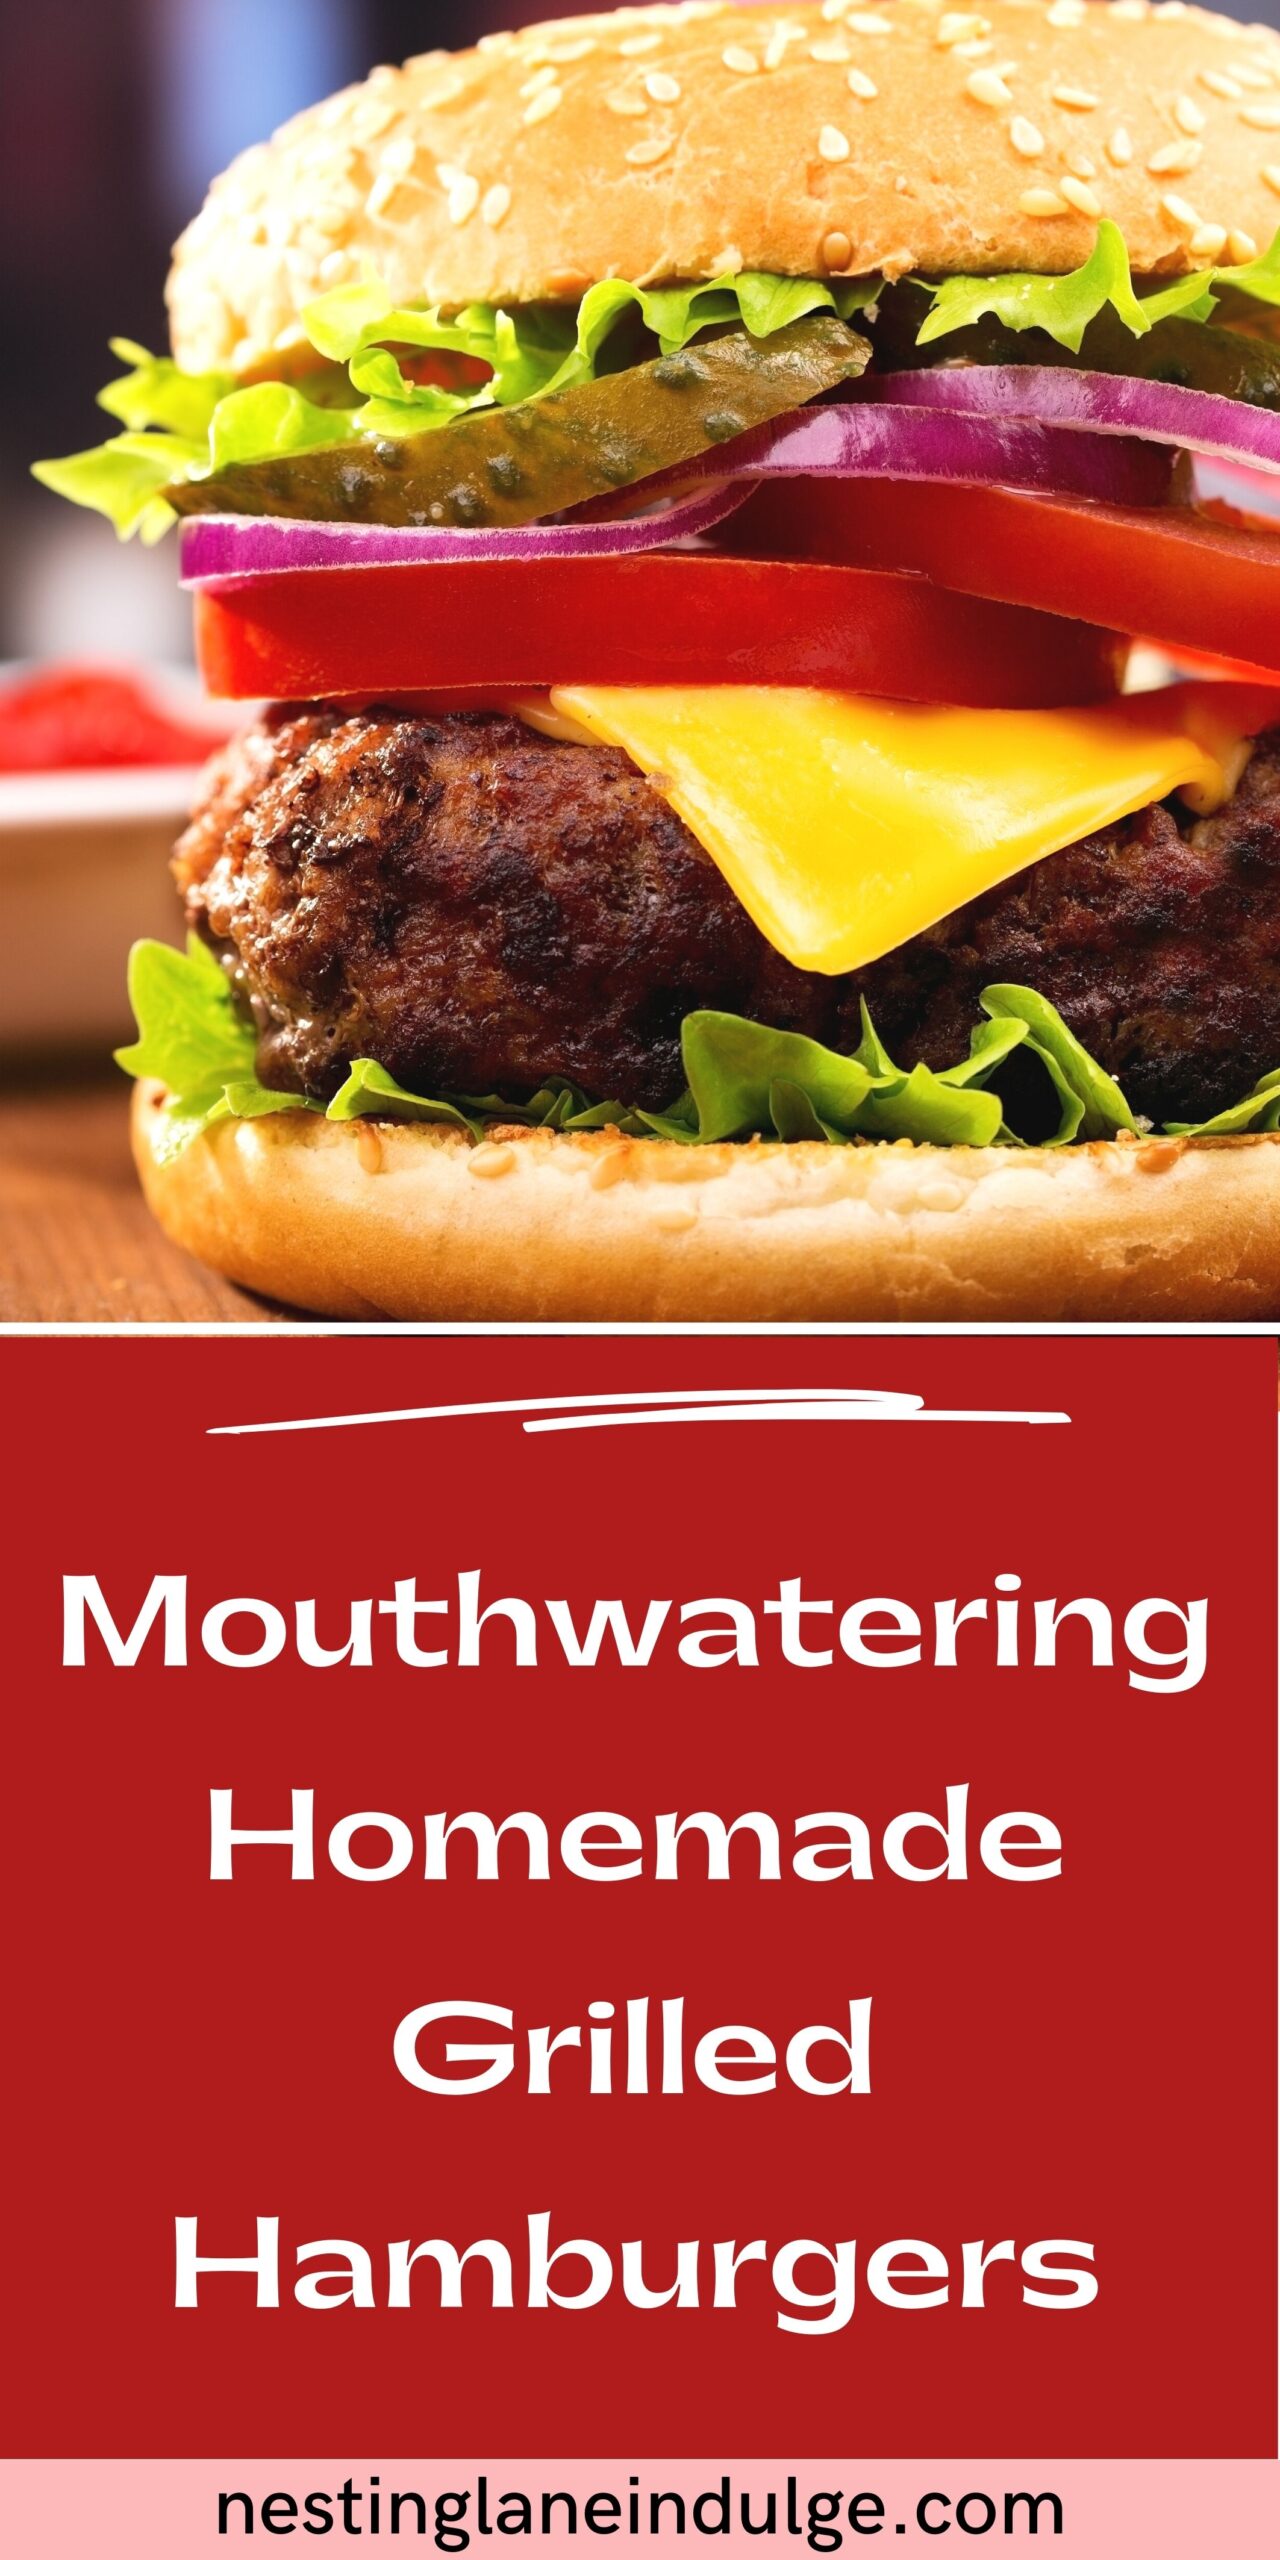 Graphic for Pinterest of Mouthwatering Homemade Hamburgers Recipe.